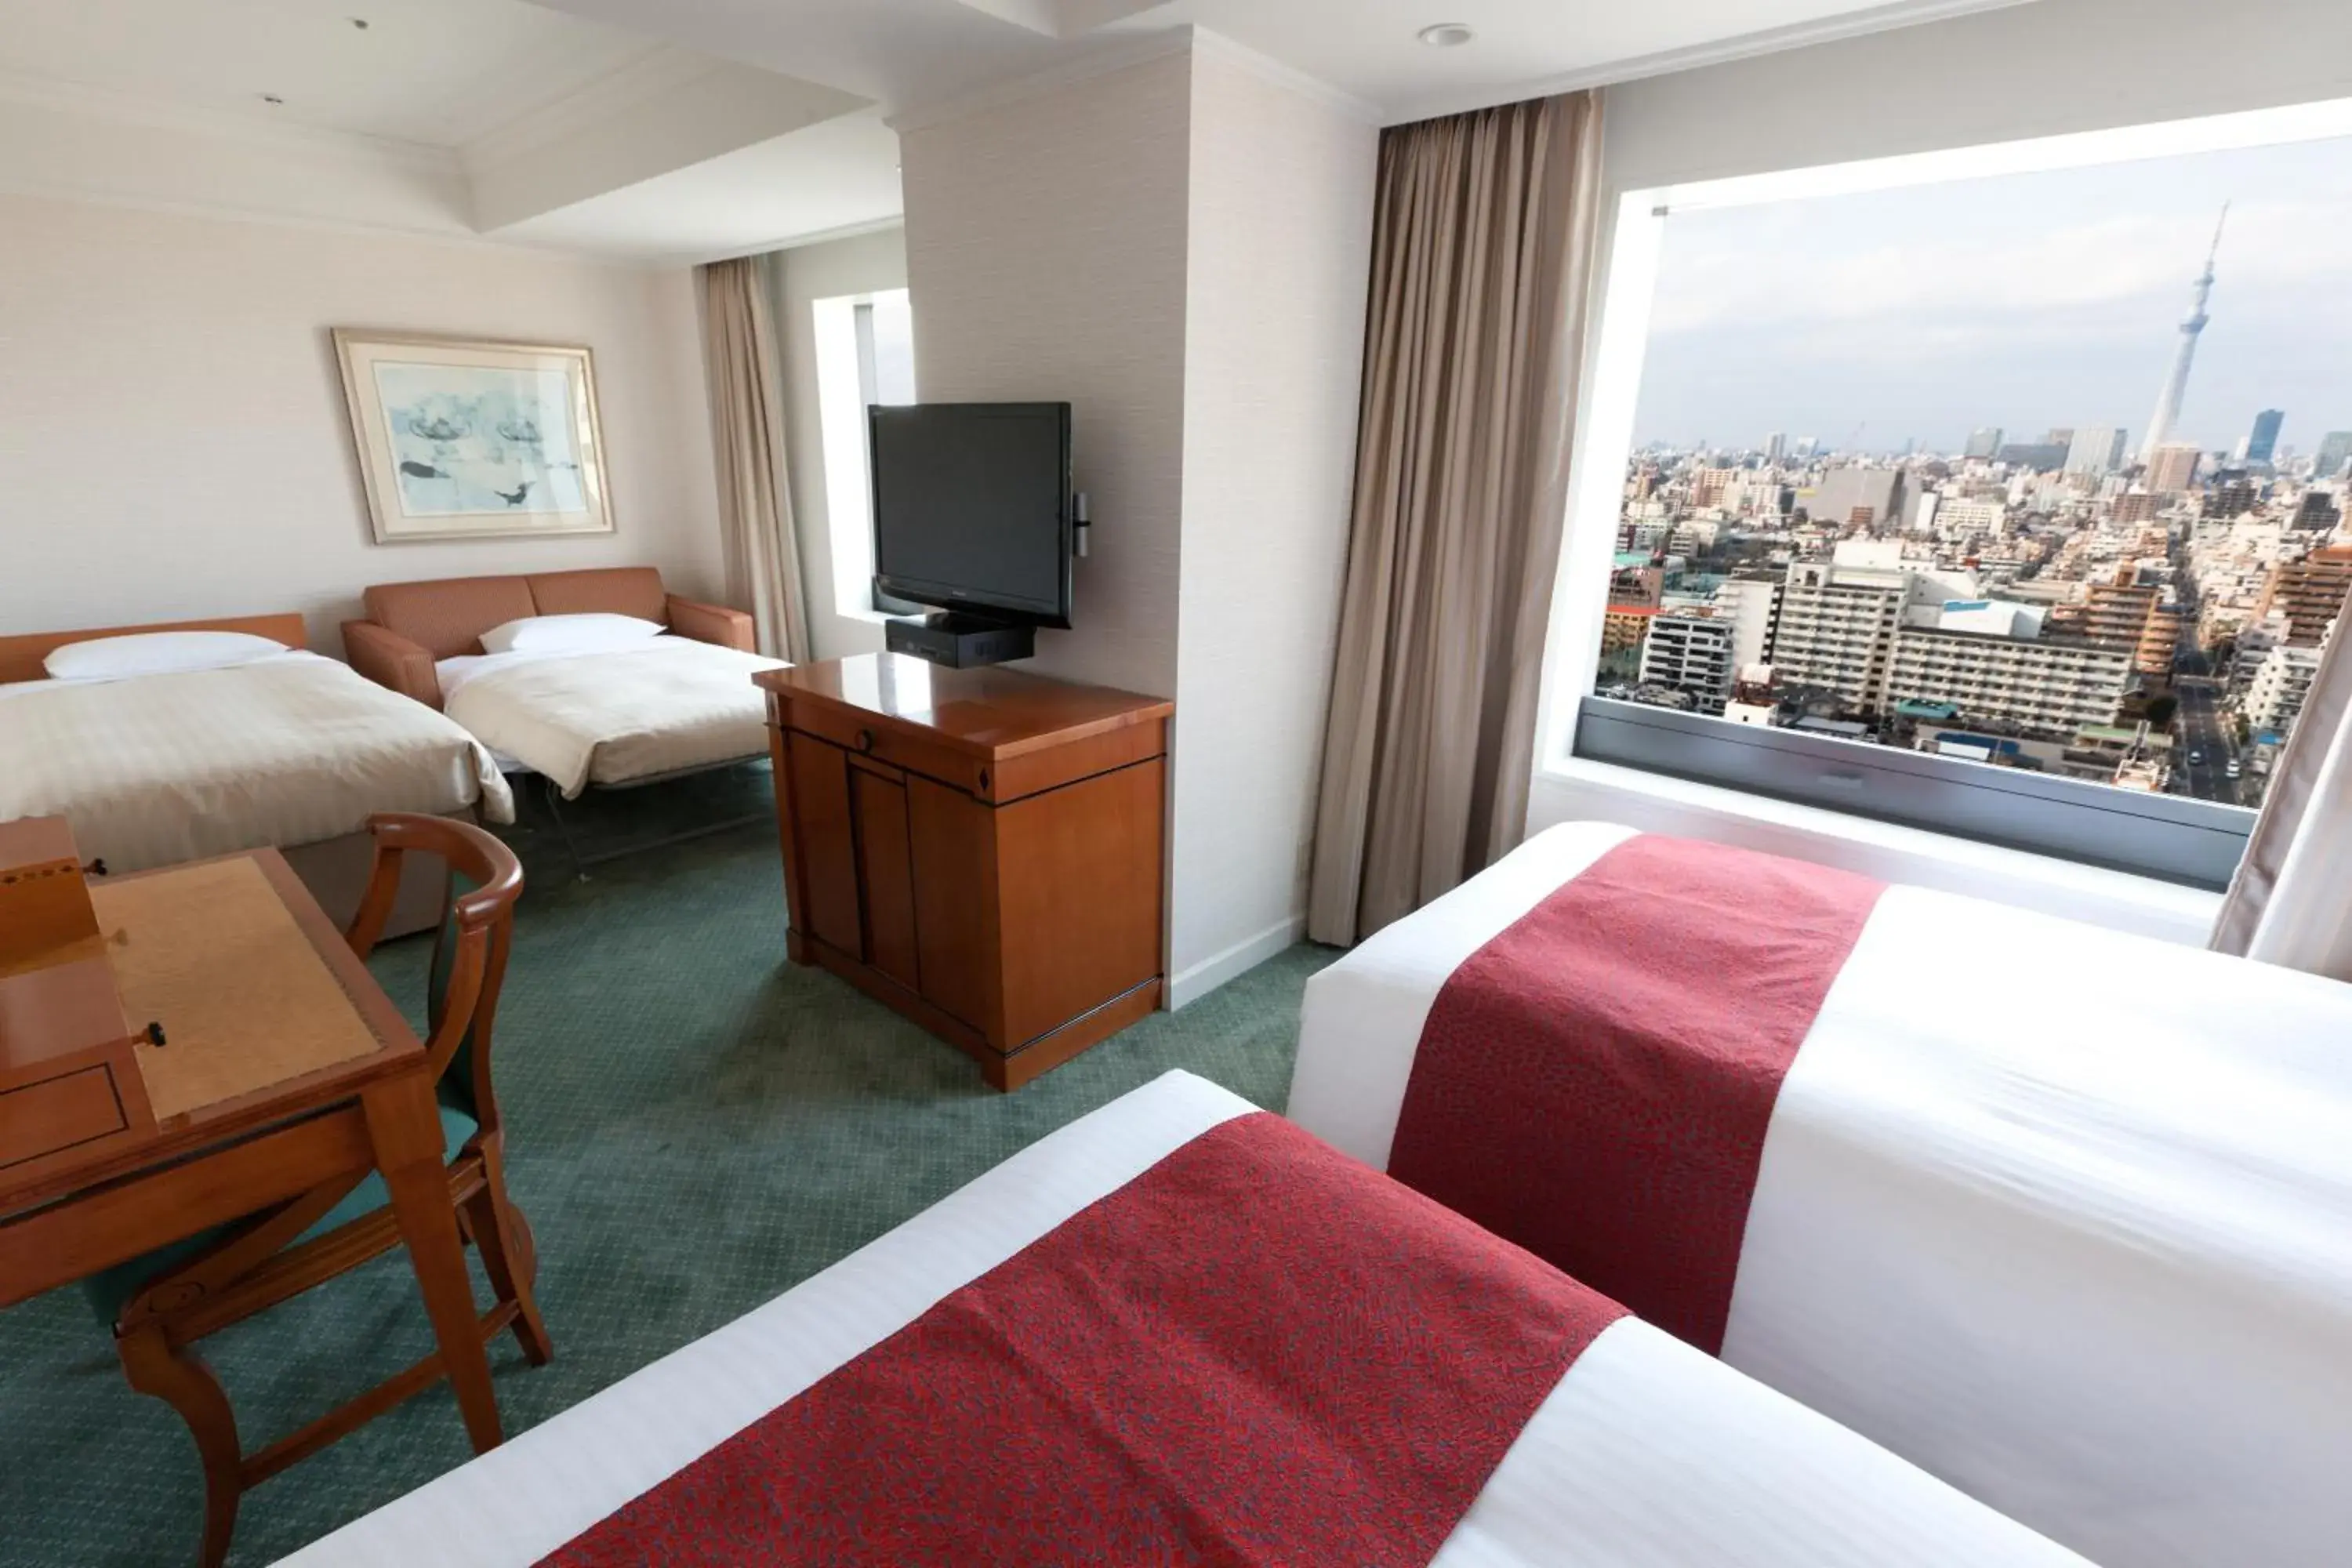 Deluxe Family Room - Non-Smoking (4 Adult) - Skytree View in Hotel East 21 Tokyo